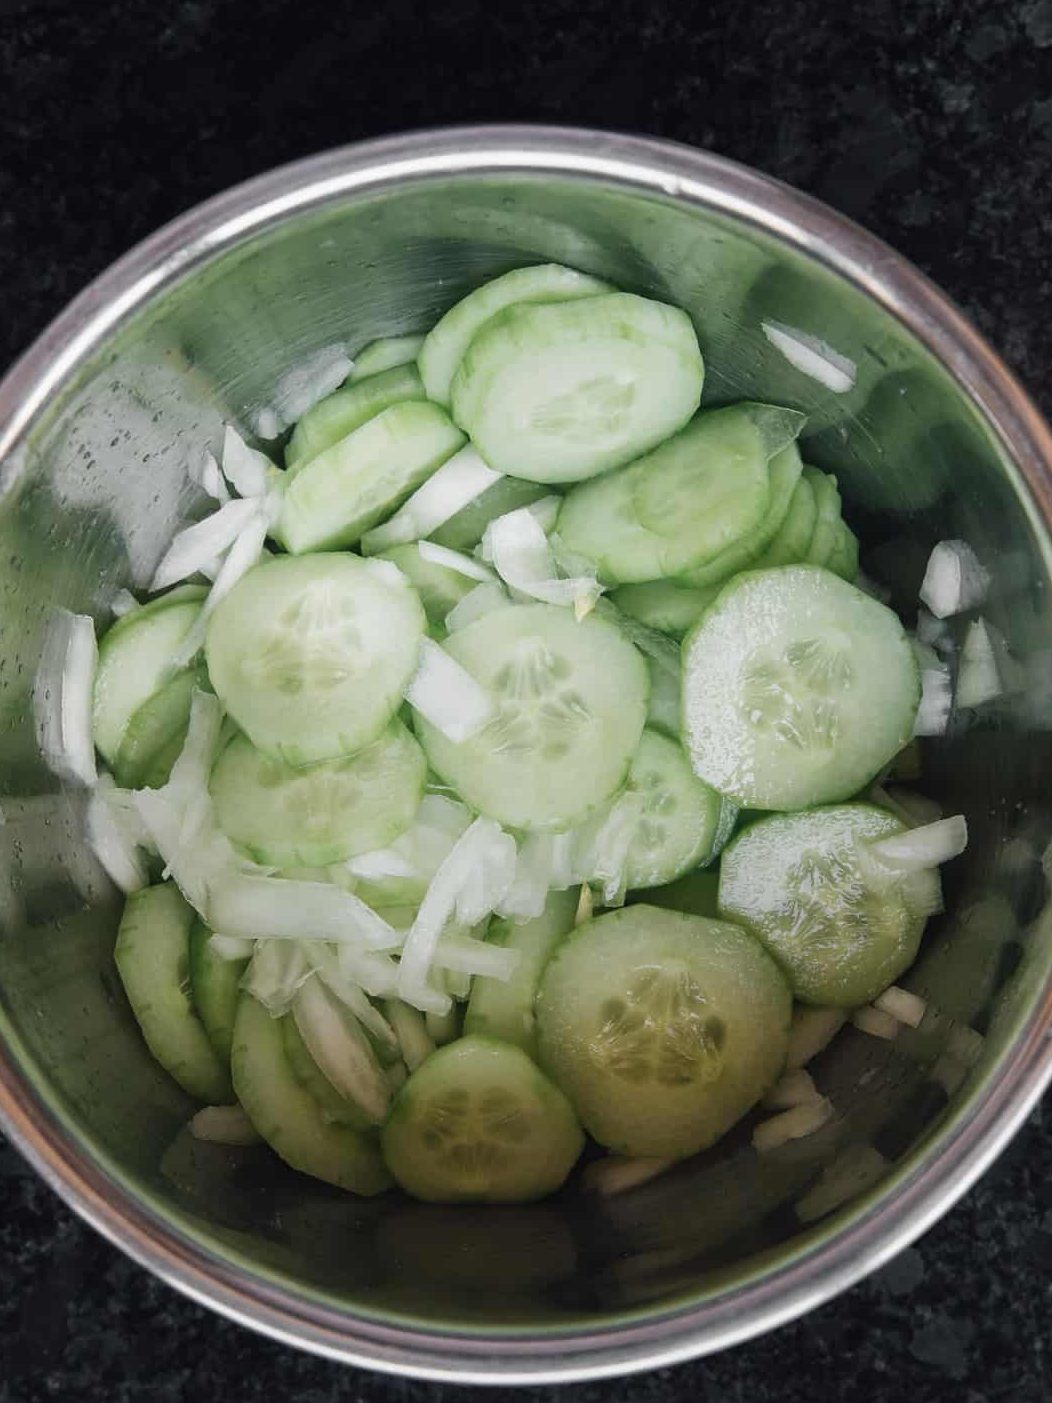 Mix cucumbers, sweet onion, and sea salt together in a bowl. Cover bowl with plastic wrap and let sit for 30 minutes.